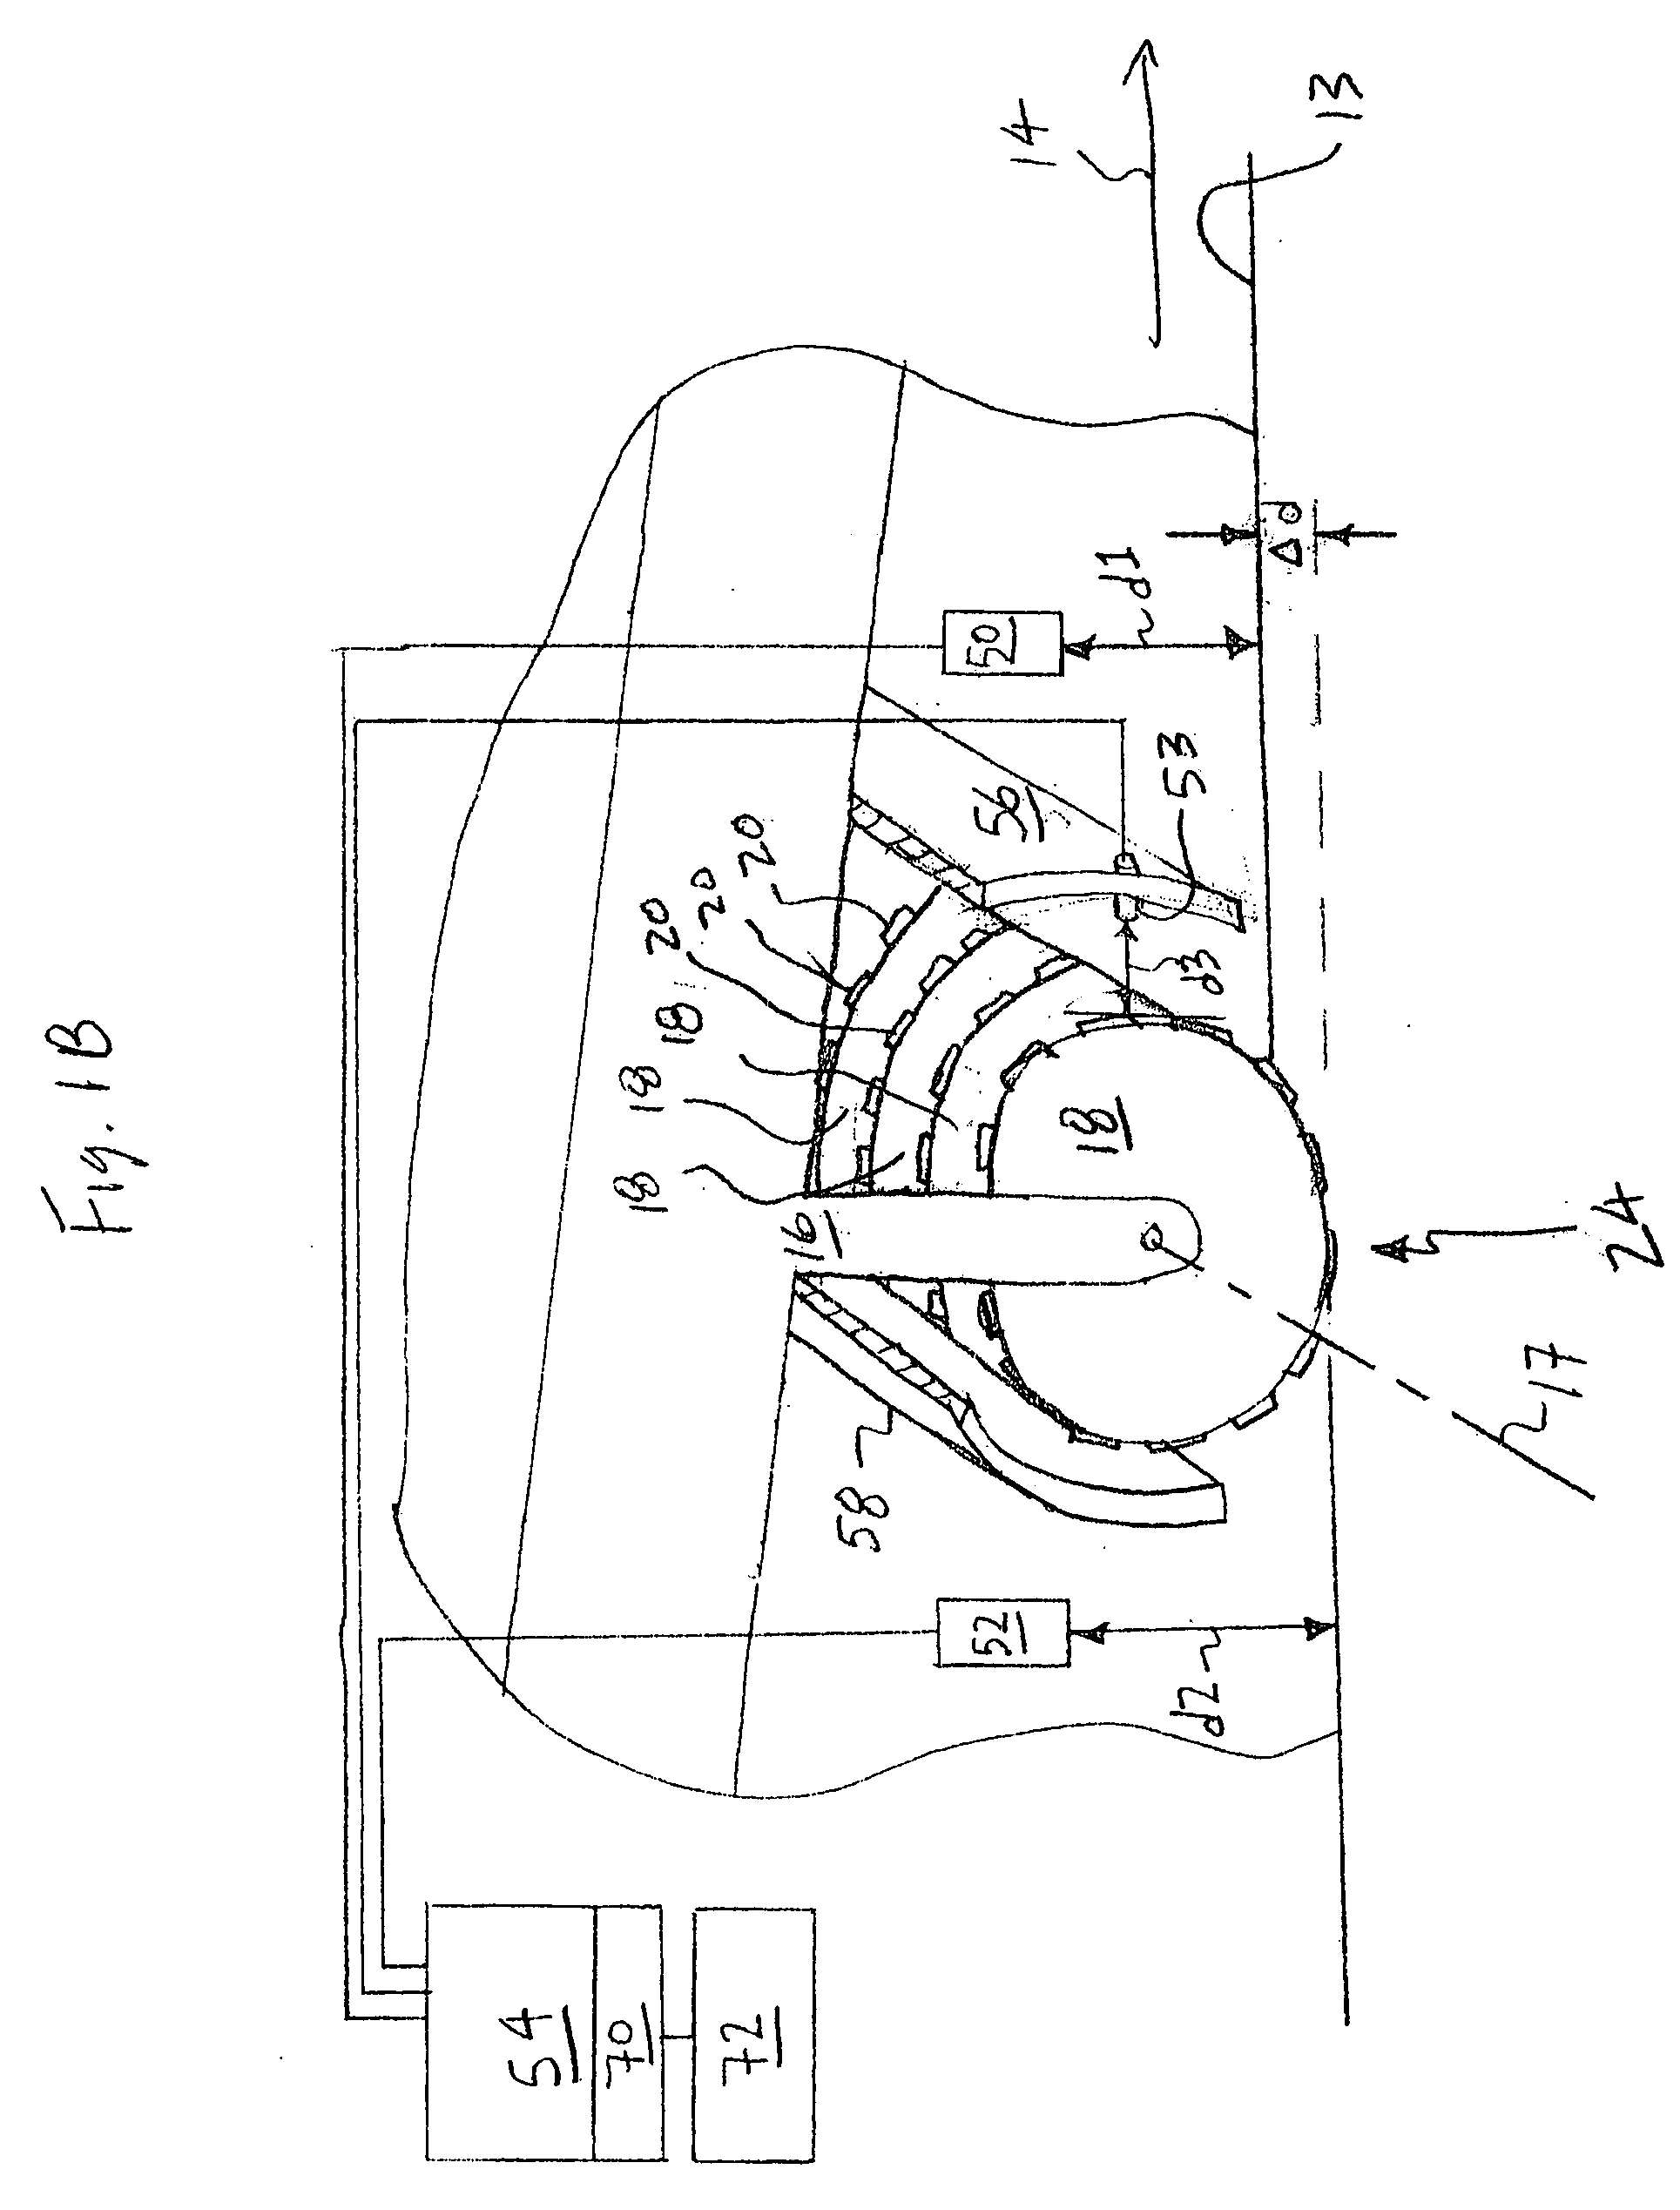 Roadway grinding/cutting apparatus and monitoring system